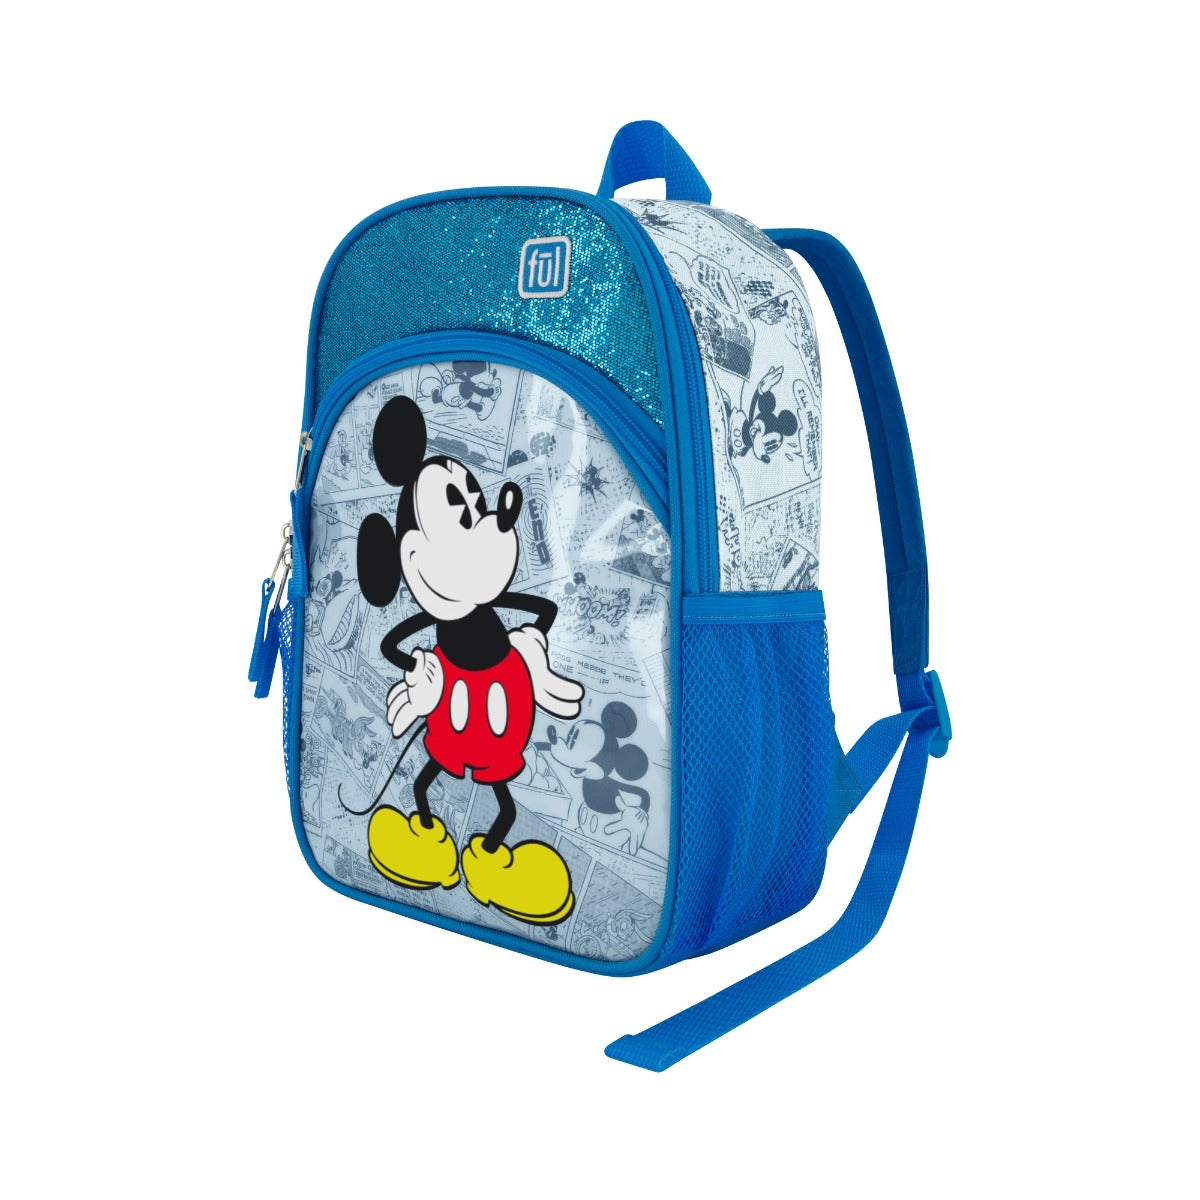 Blue Disney Heritage Mikey Mouse matching 2 piece set - kids 13" backpack for travel